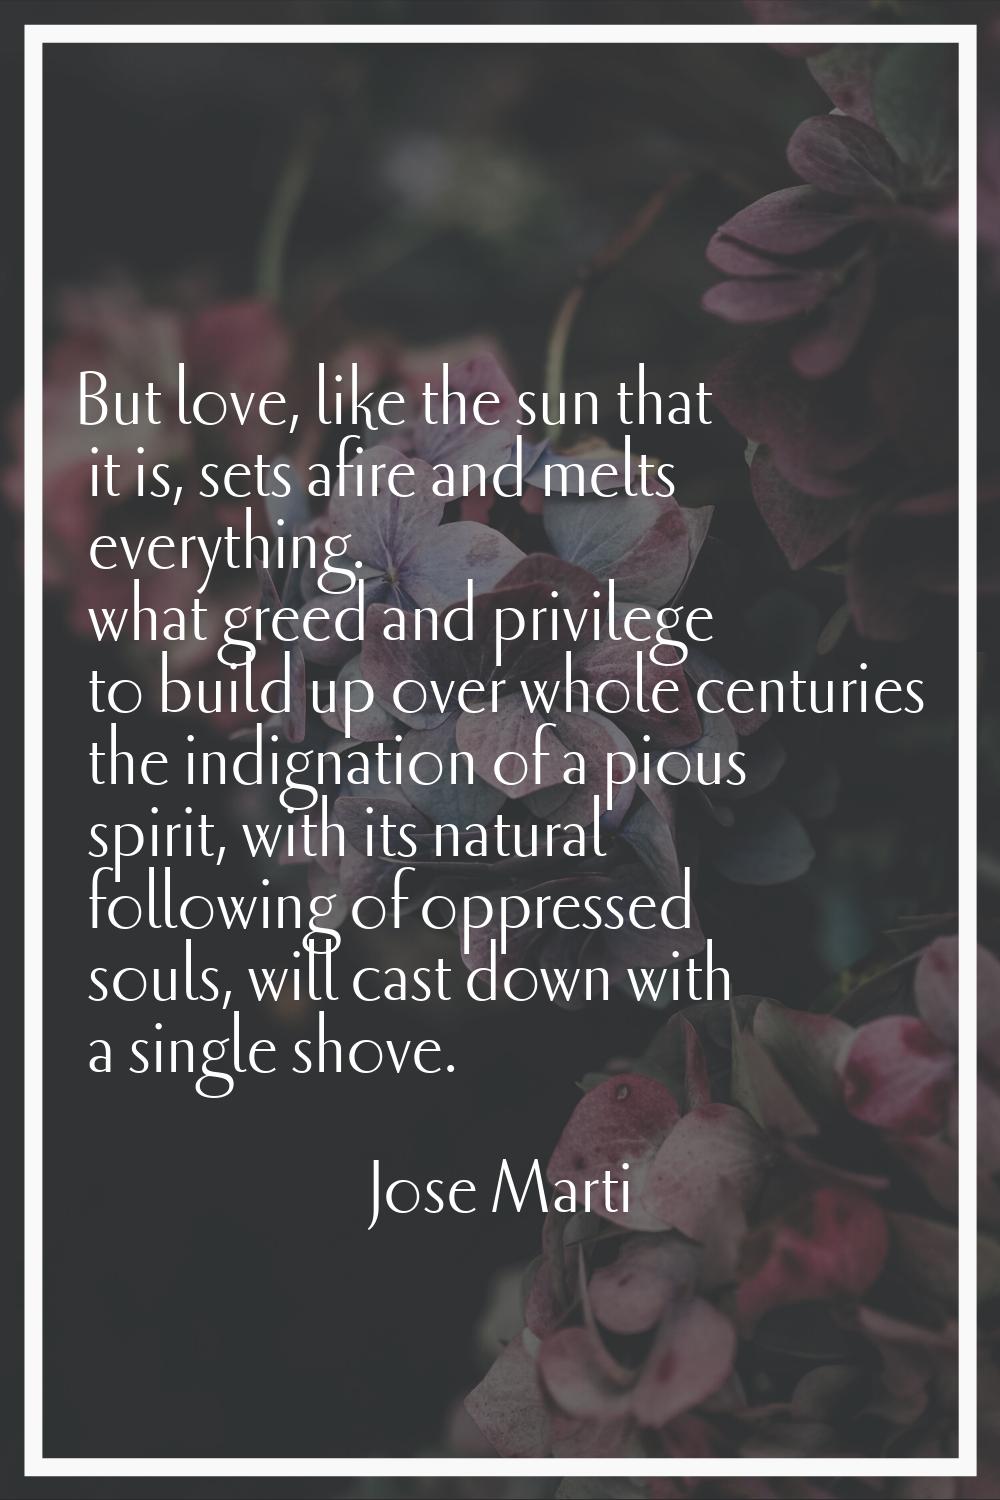 But love, like the sun that it is, sets afire and melts everything. what greed and privilege to bui